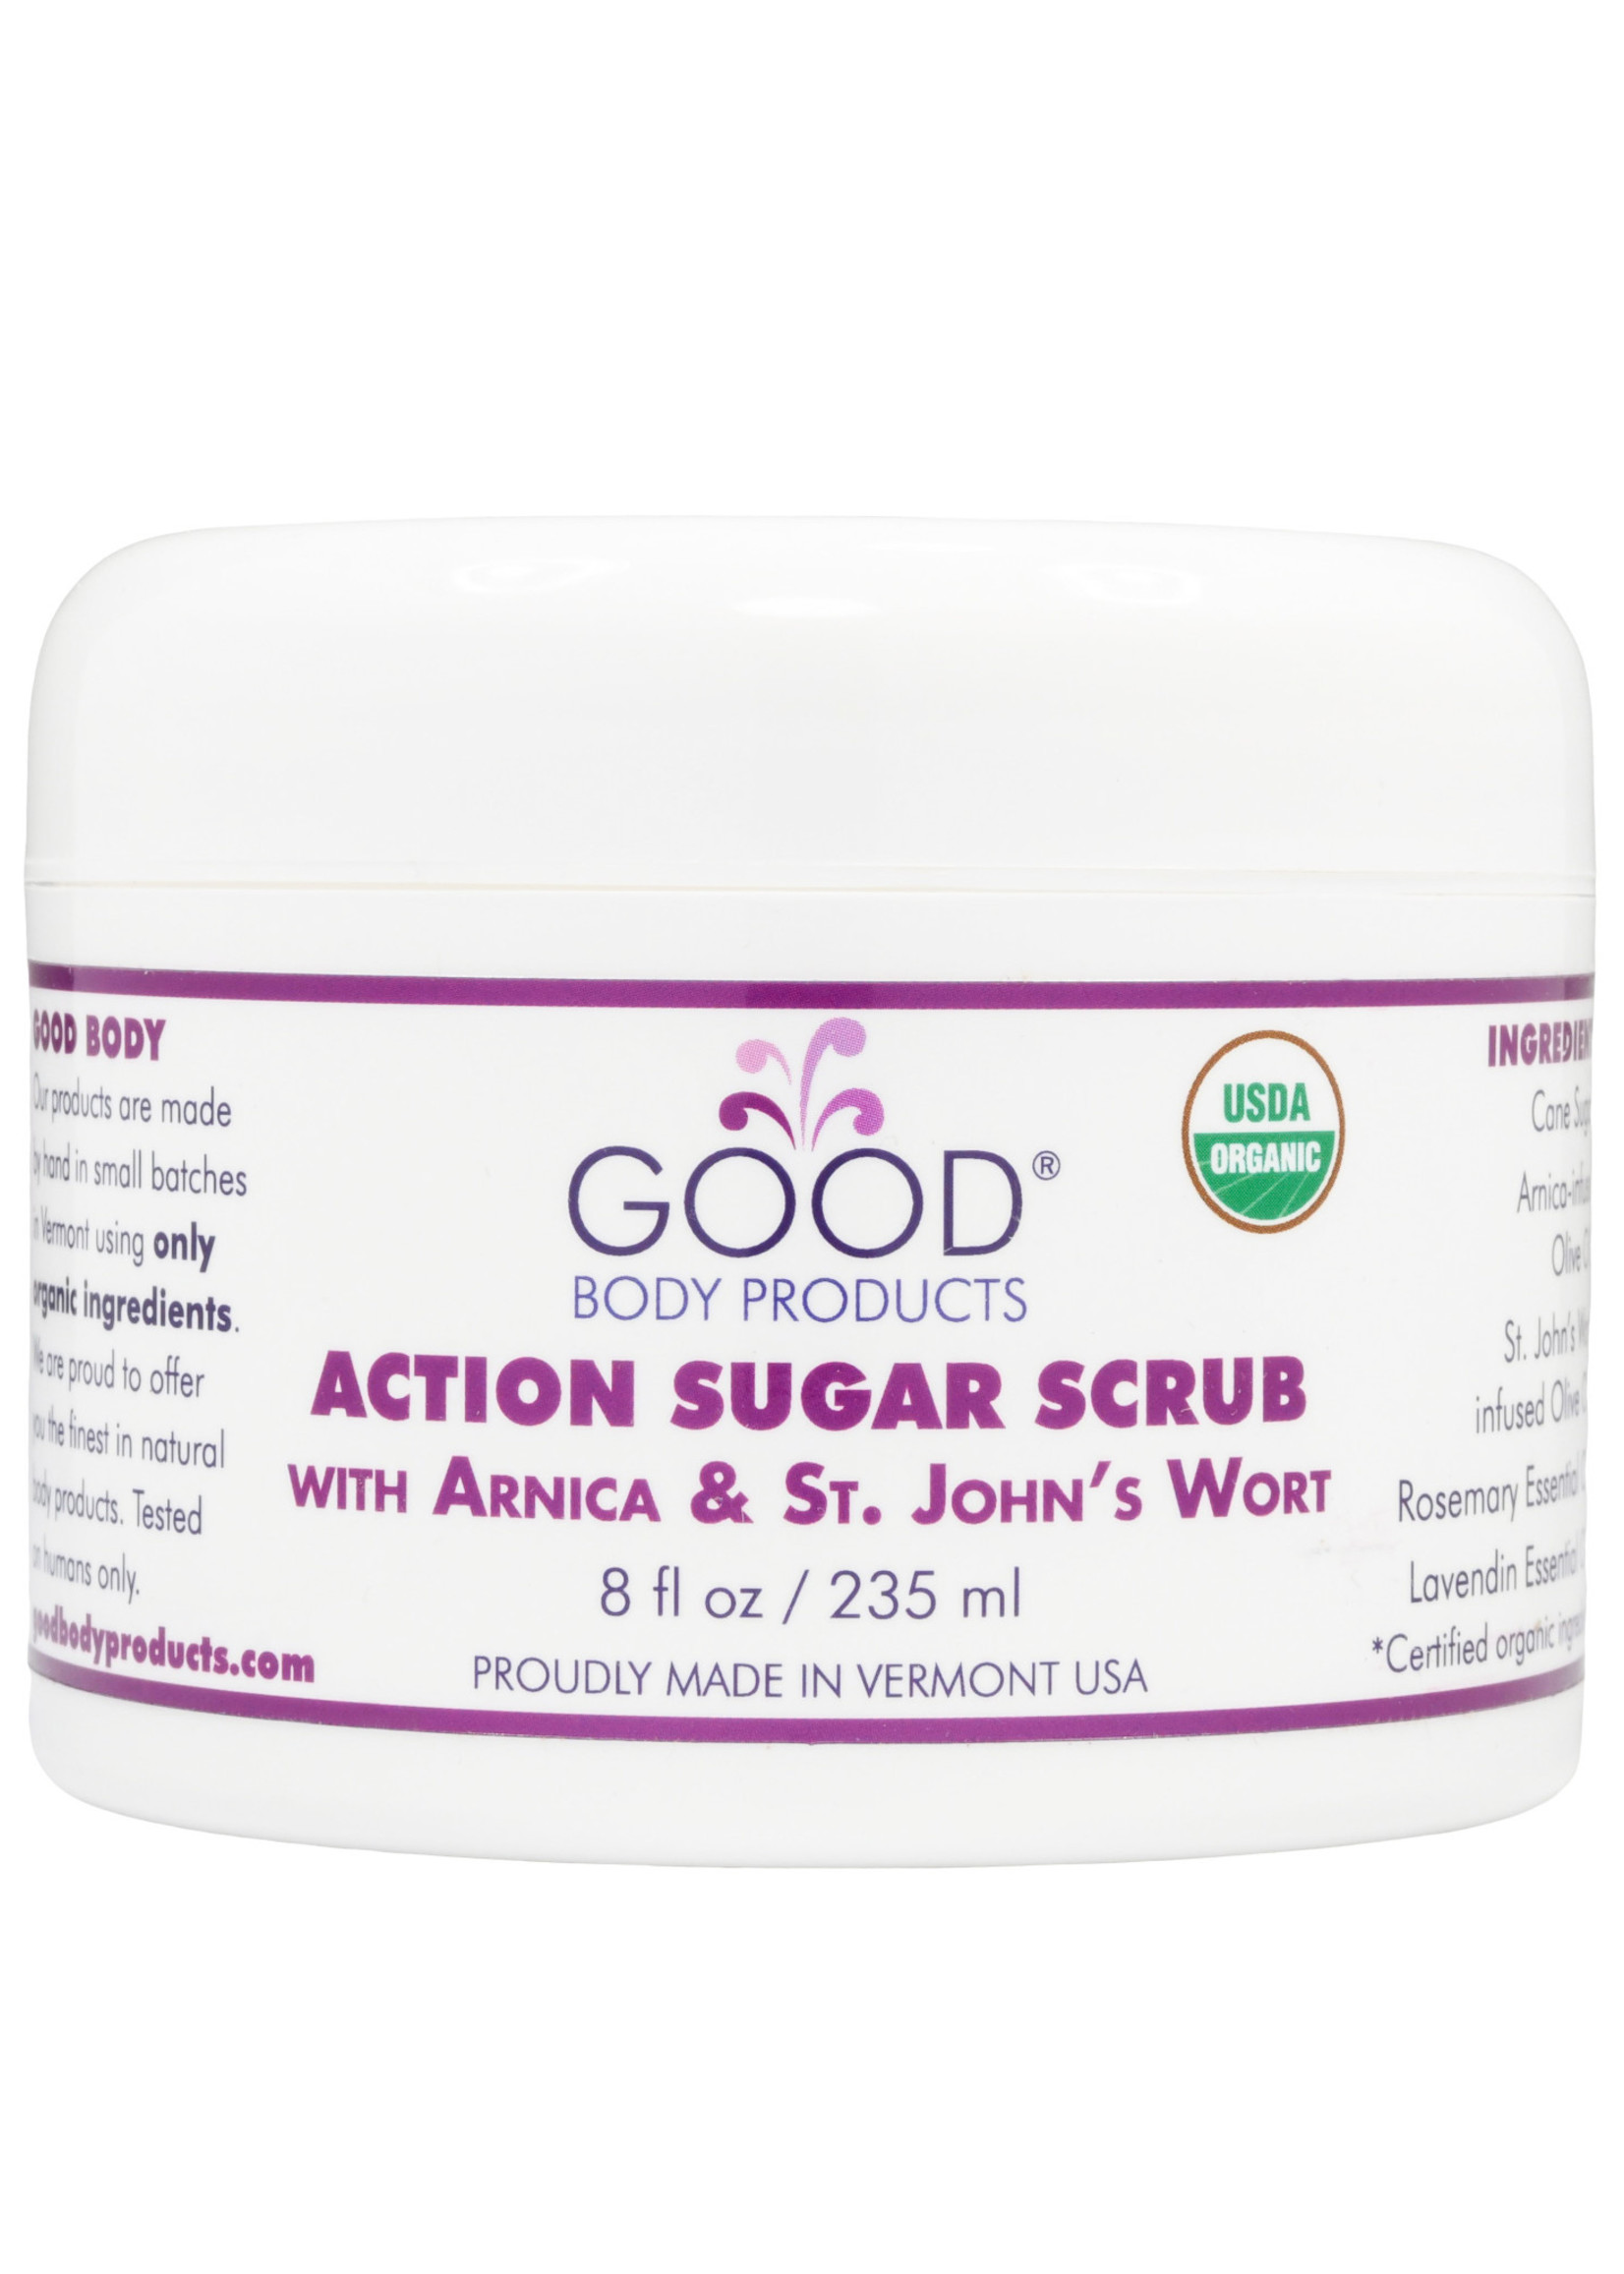 Good Body Products ACTION SUGAR SCRUB with Arnica and St. John's Wort